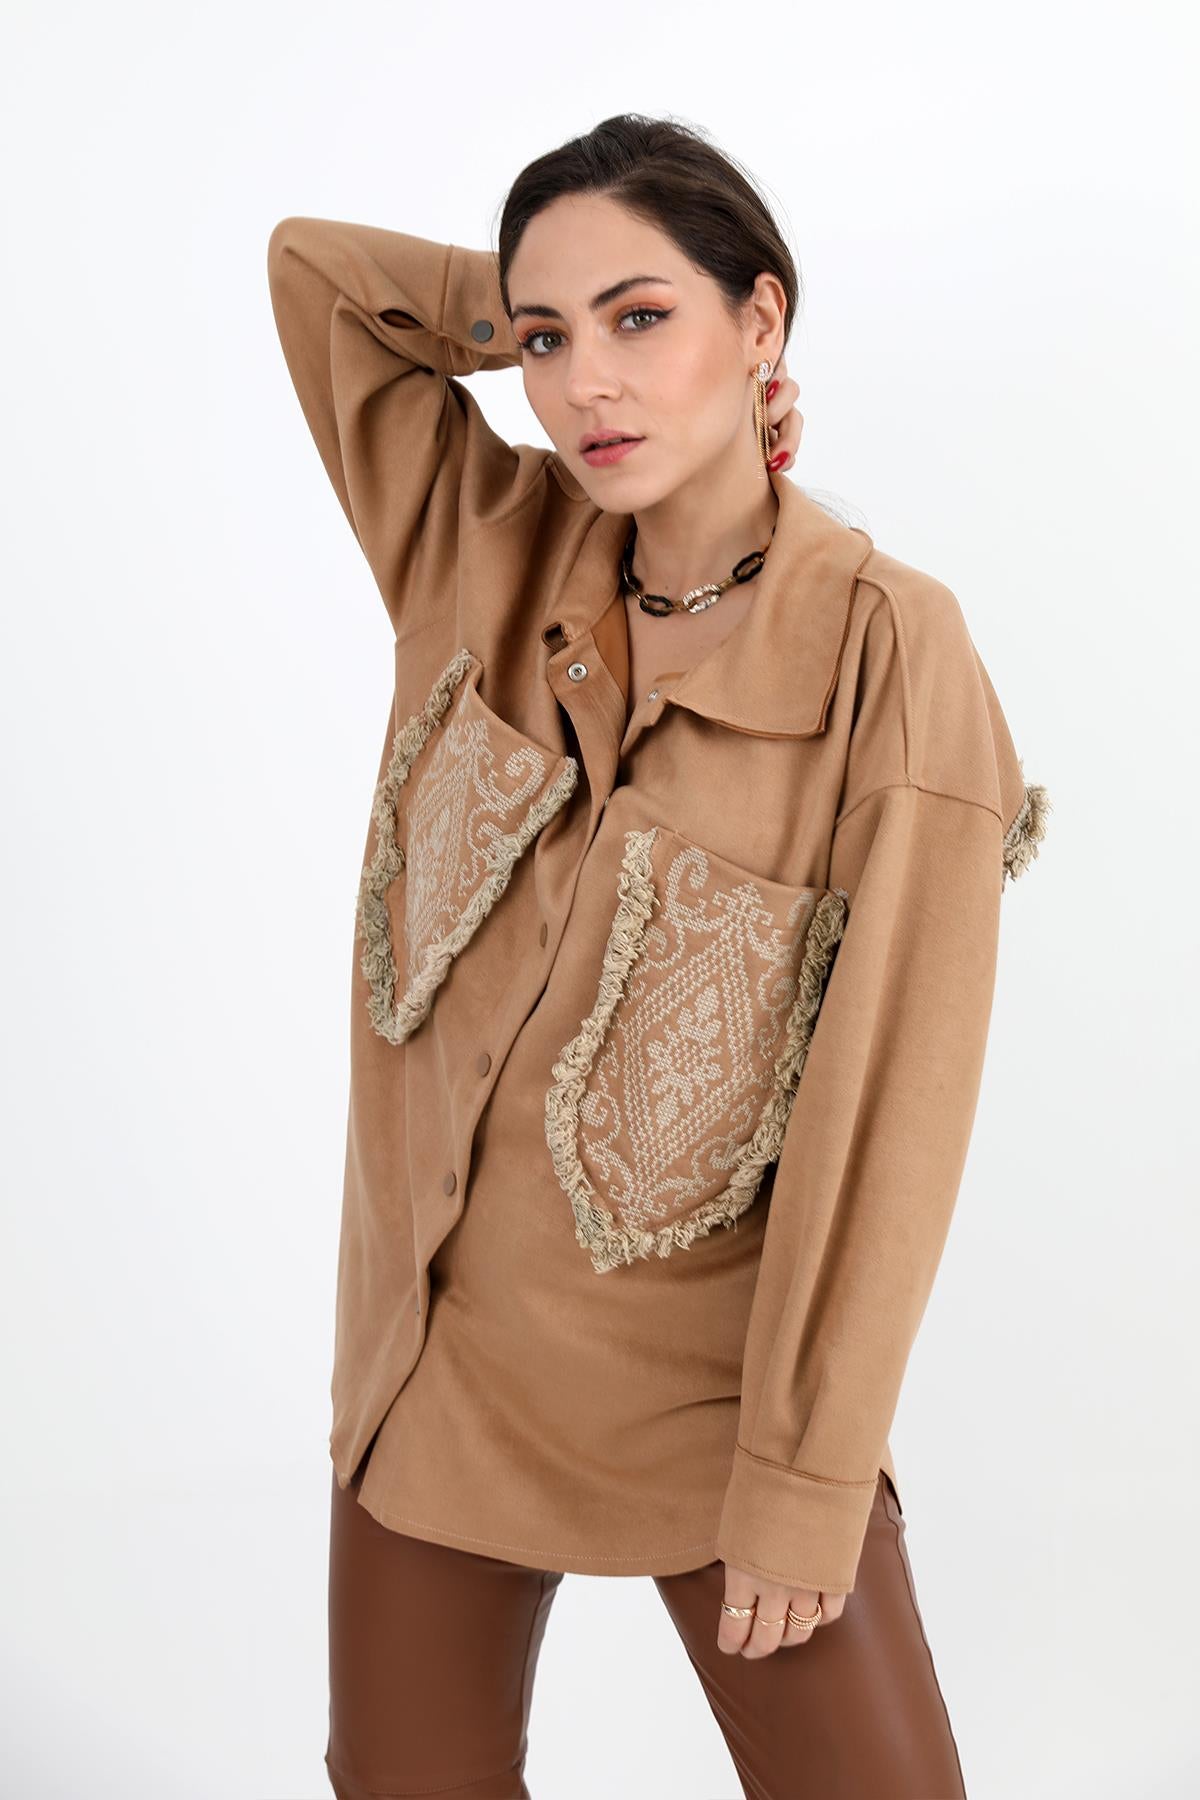 Women's Shirt Pocket Tasseled Embroidered Suede - Camel - STREETMODE ™